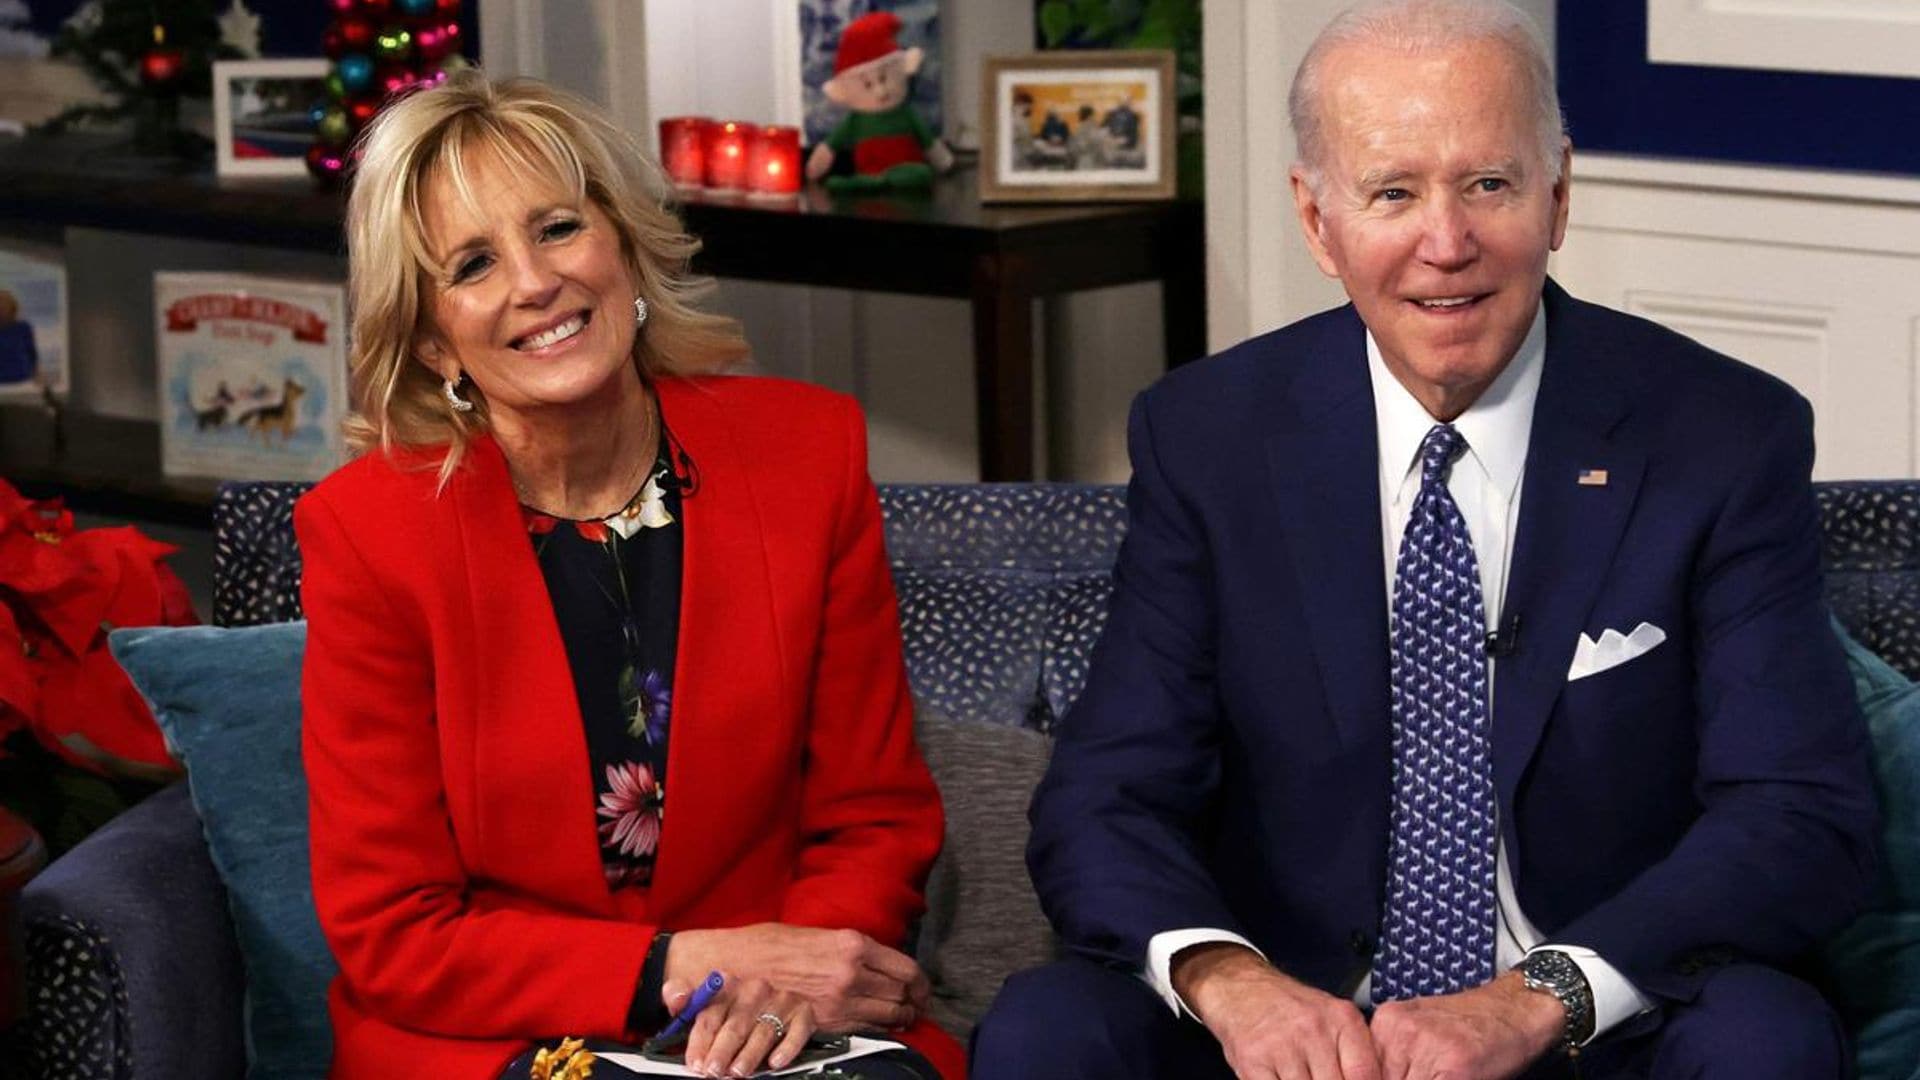 Meet the newest member of the Biden family